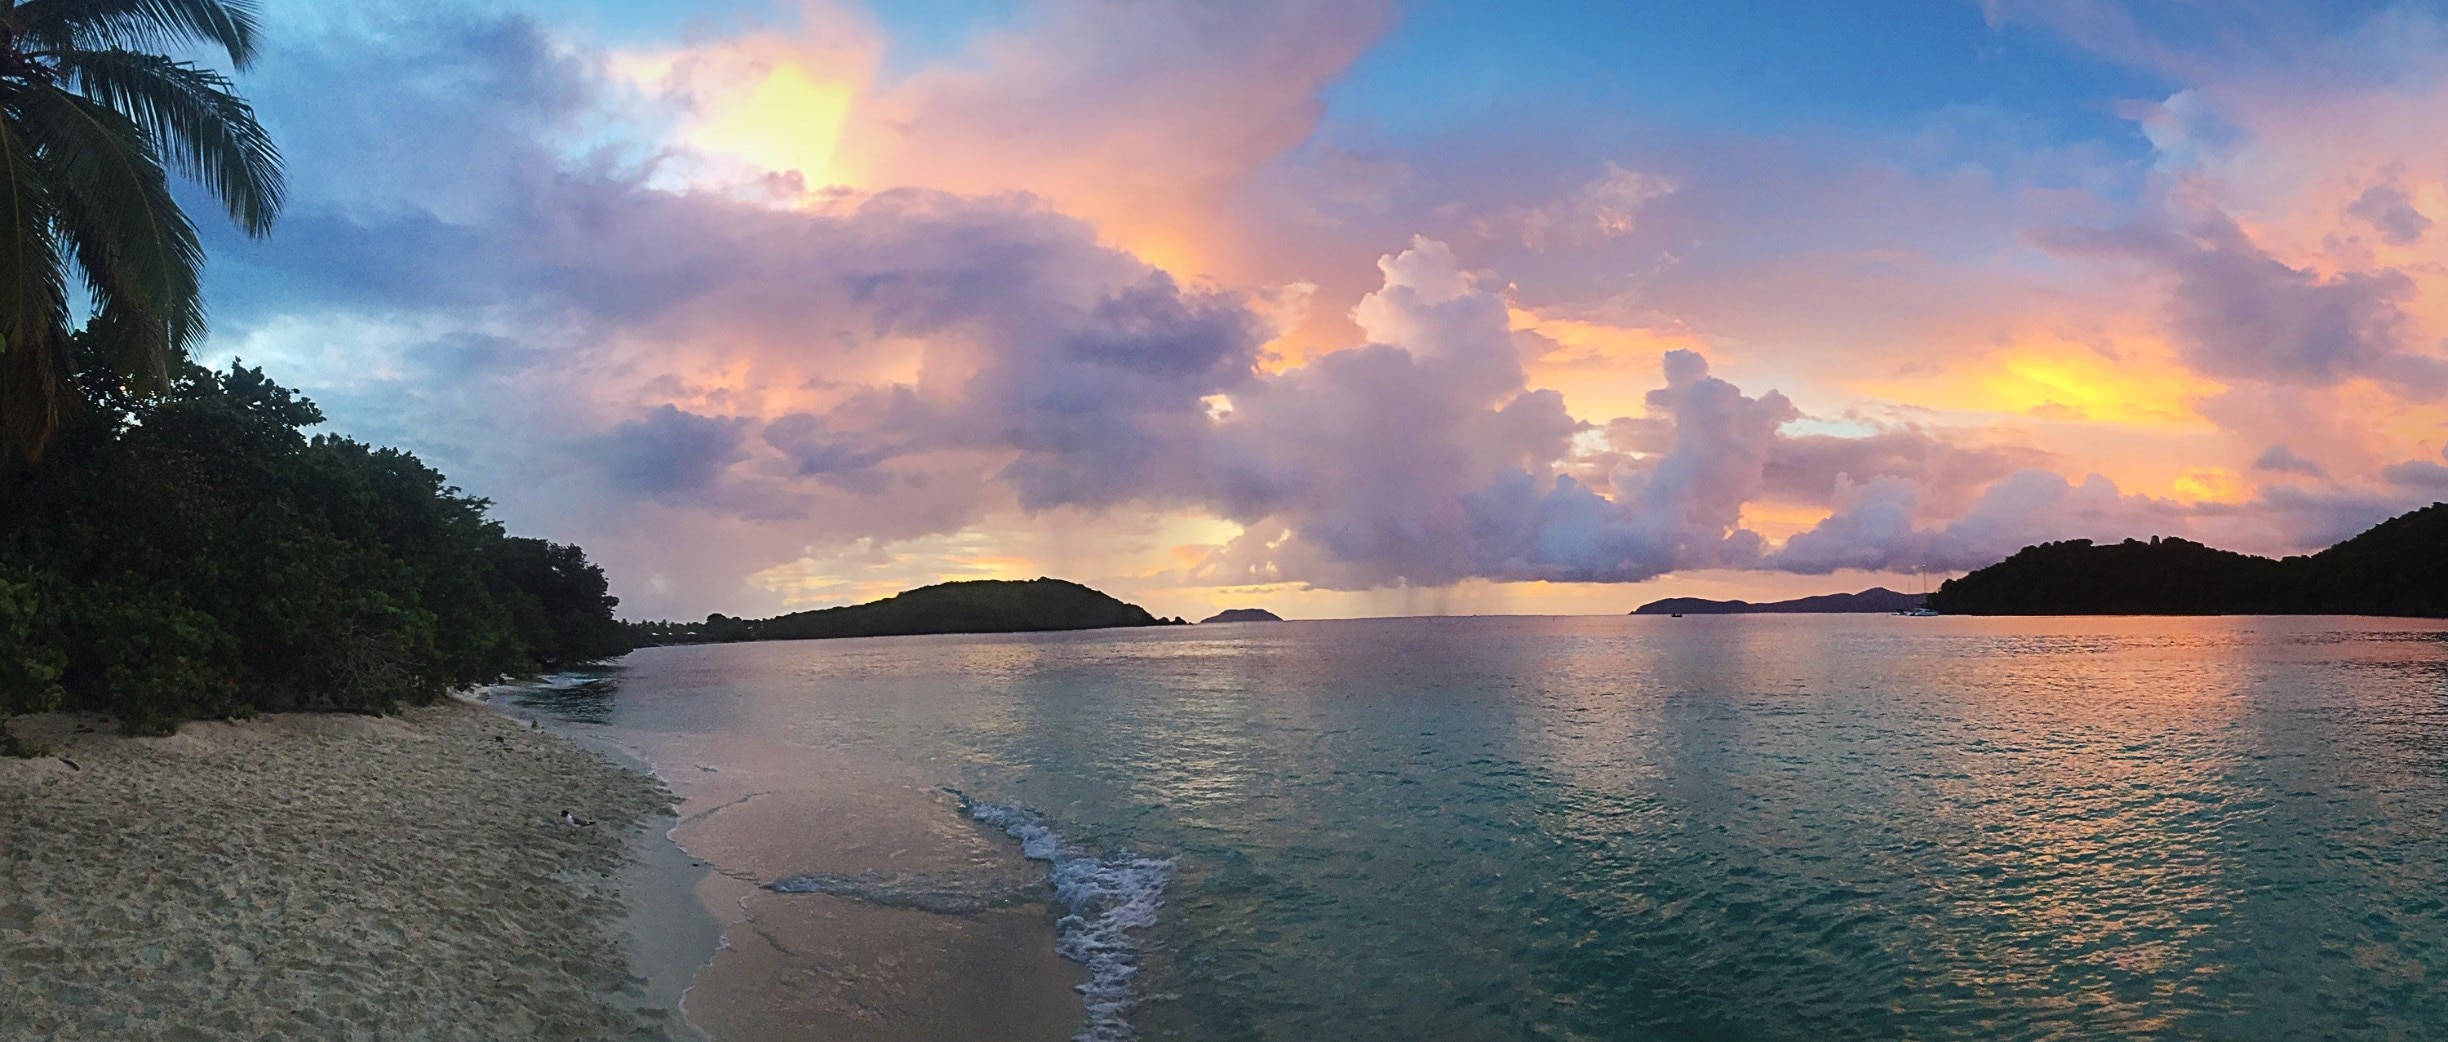 Since I like to sleep late...Here's another sunset from STJ!
#nationalpark #beach #island #sunset #nature